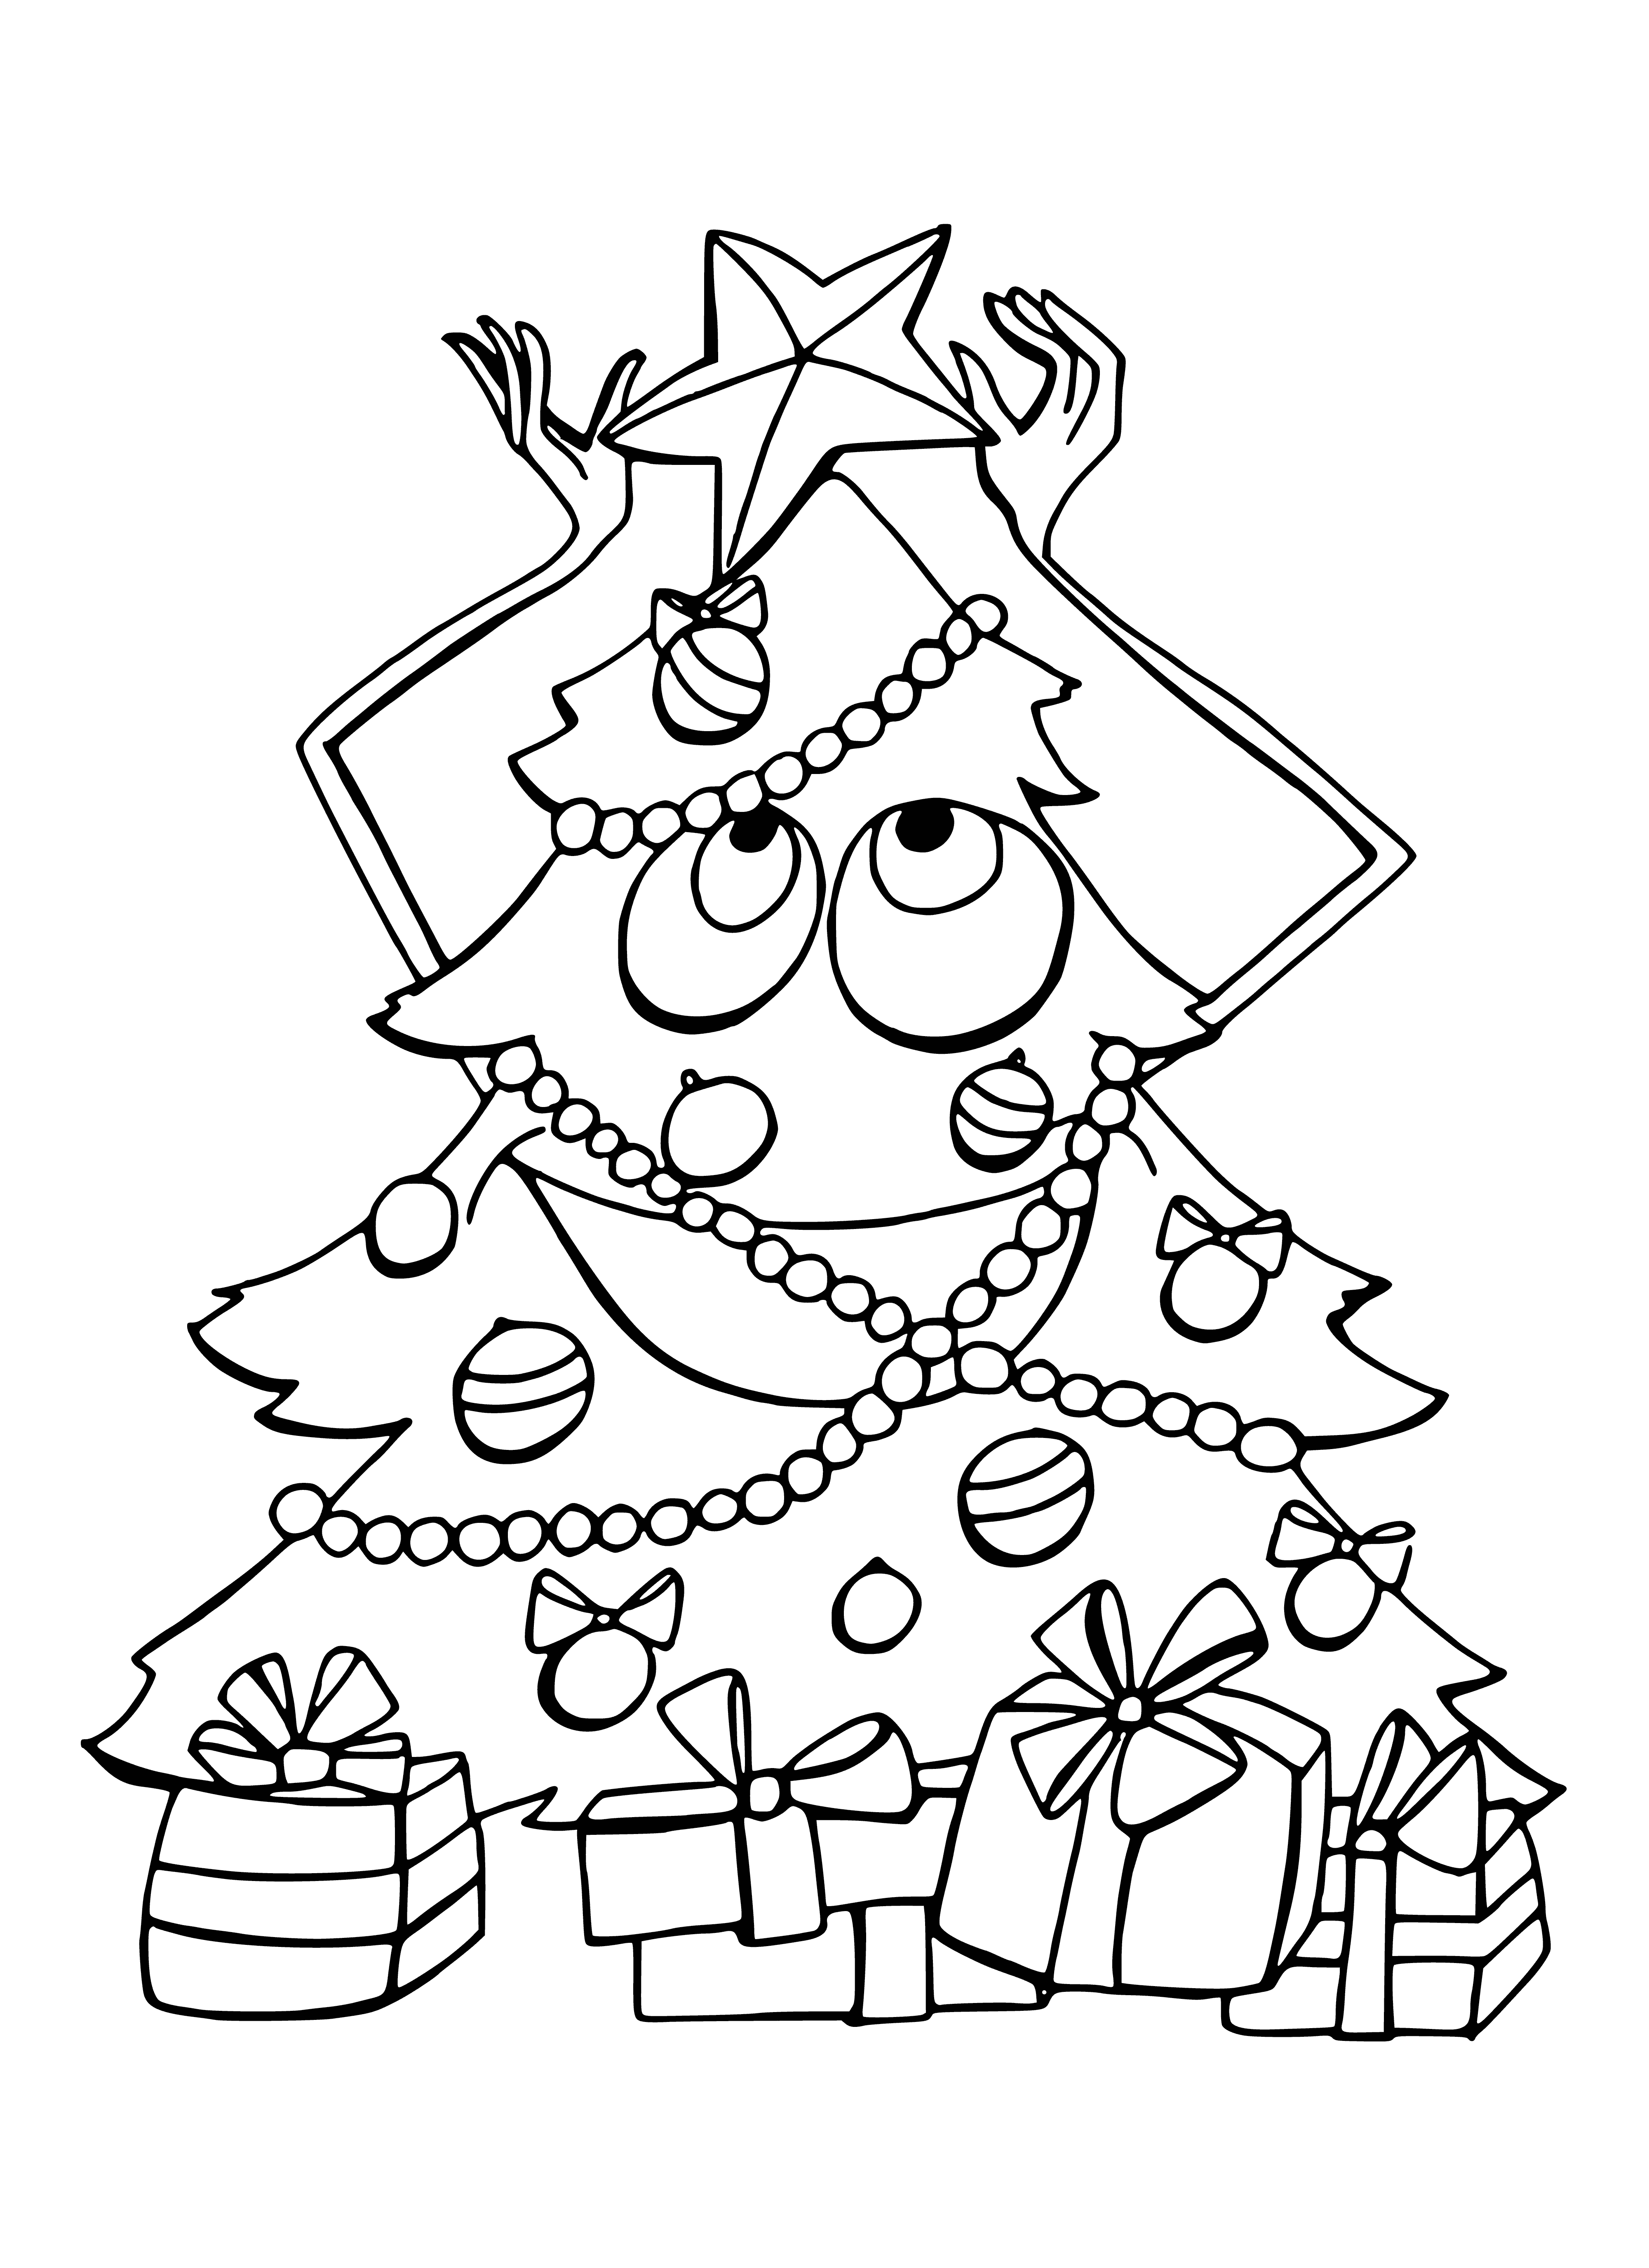 coloring page: A tall Christmas tree adorned with colorful lights, decorations, tinsel and a star sits atop, surrounded by presents. #ChristmasTree